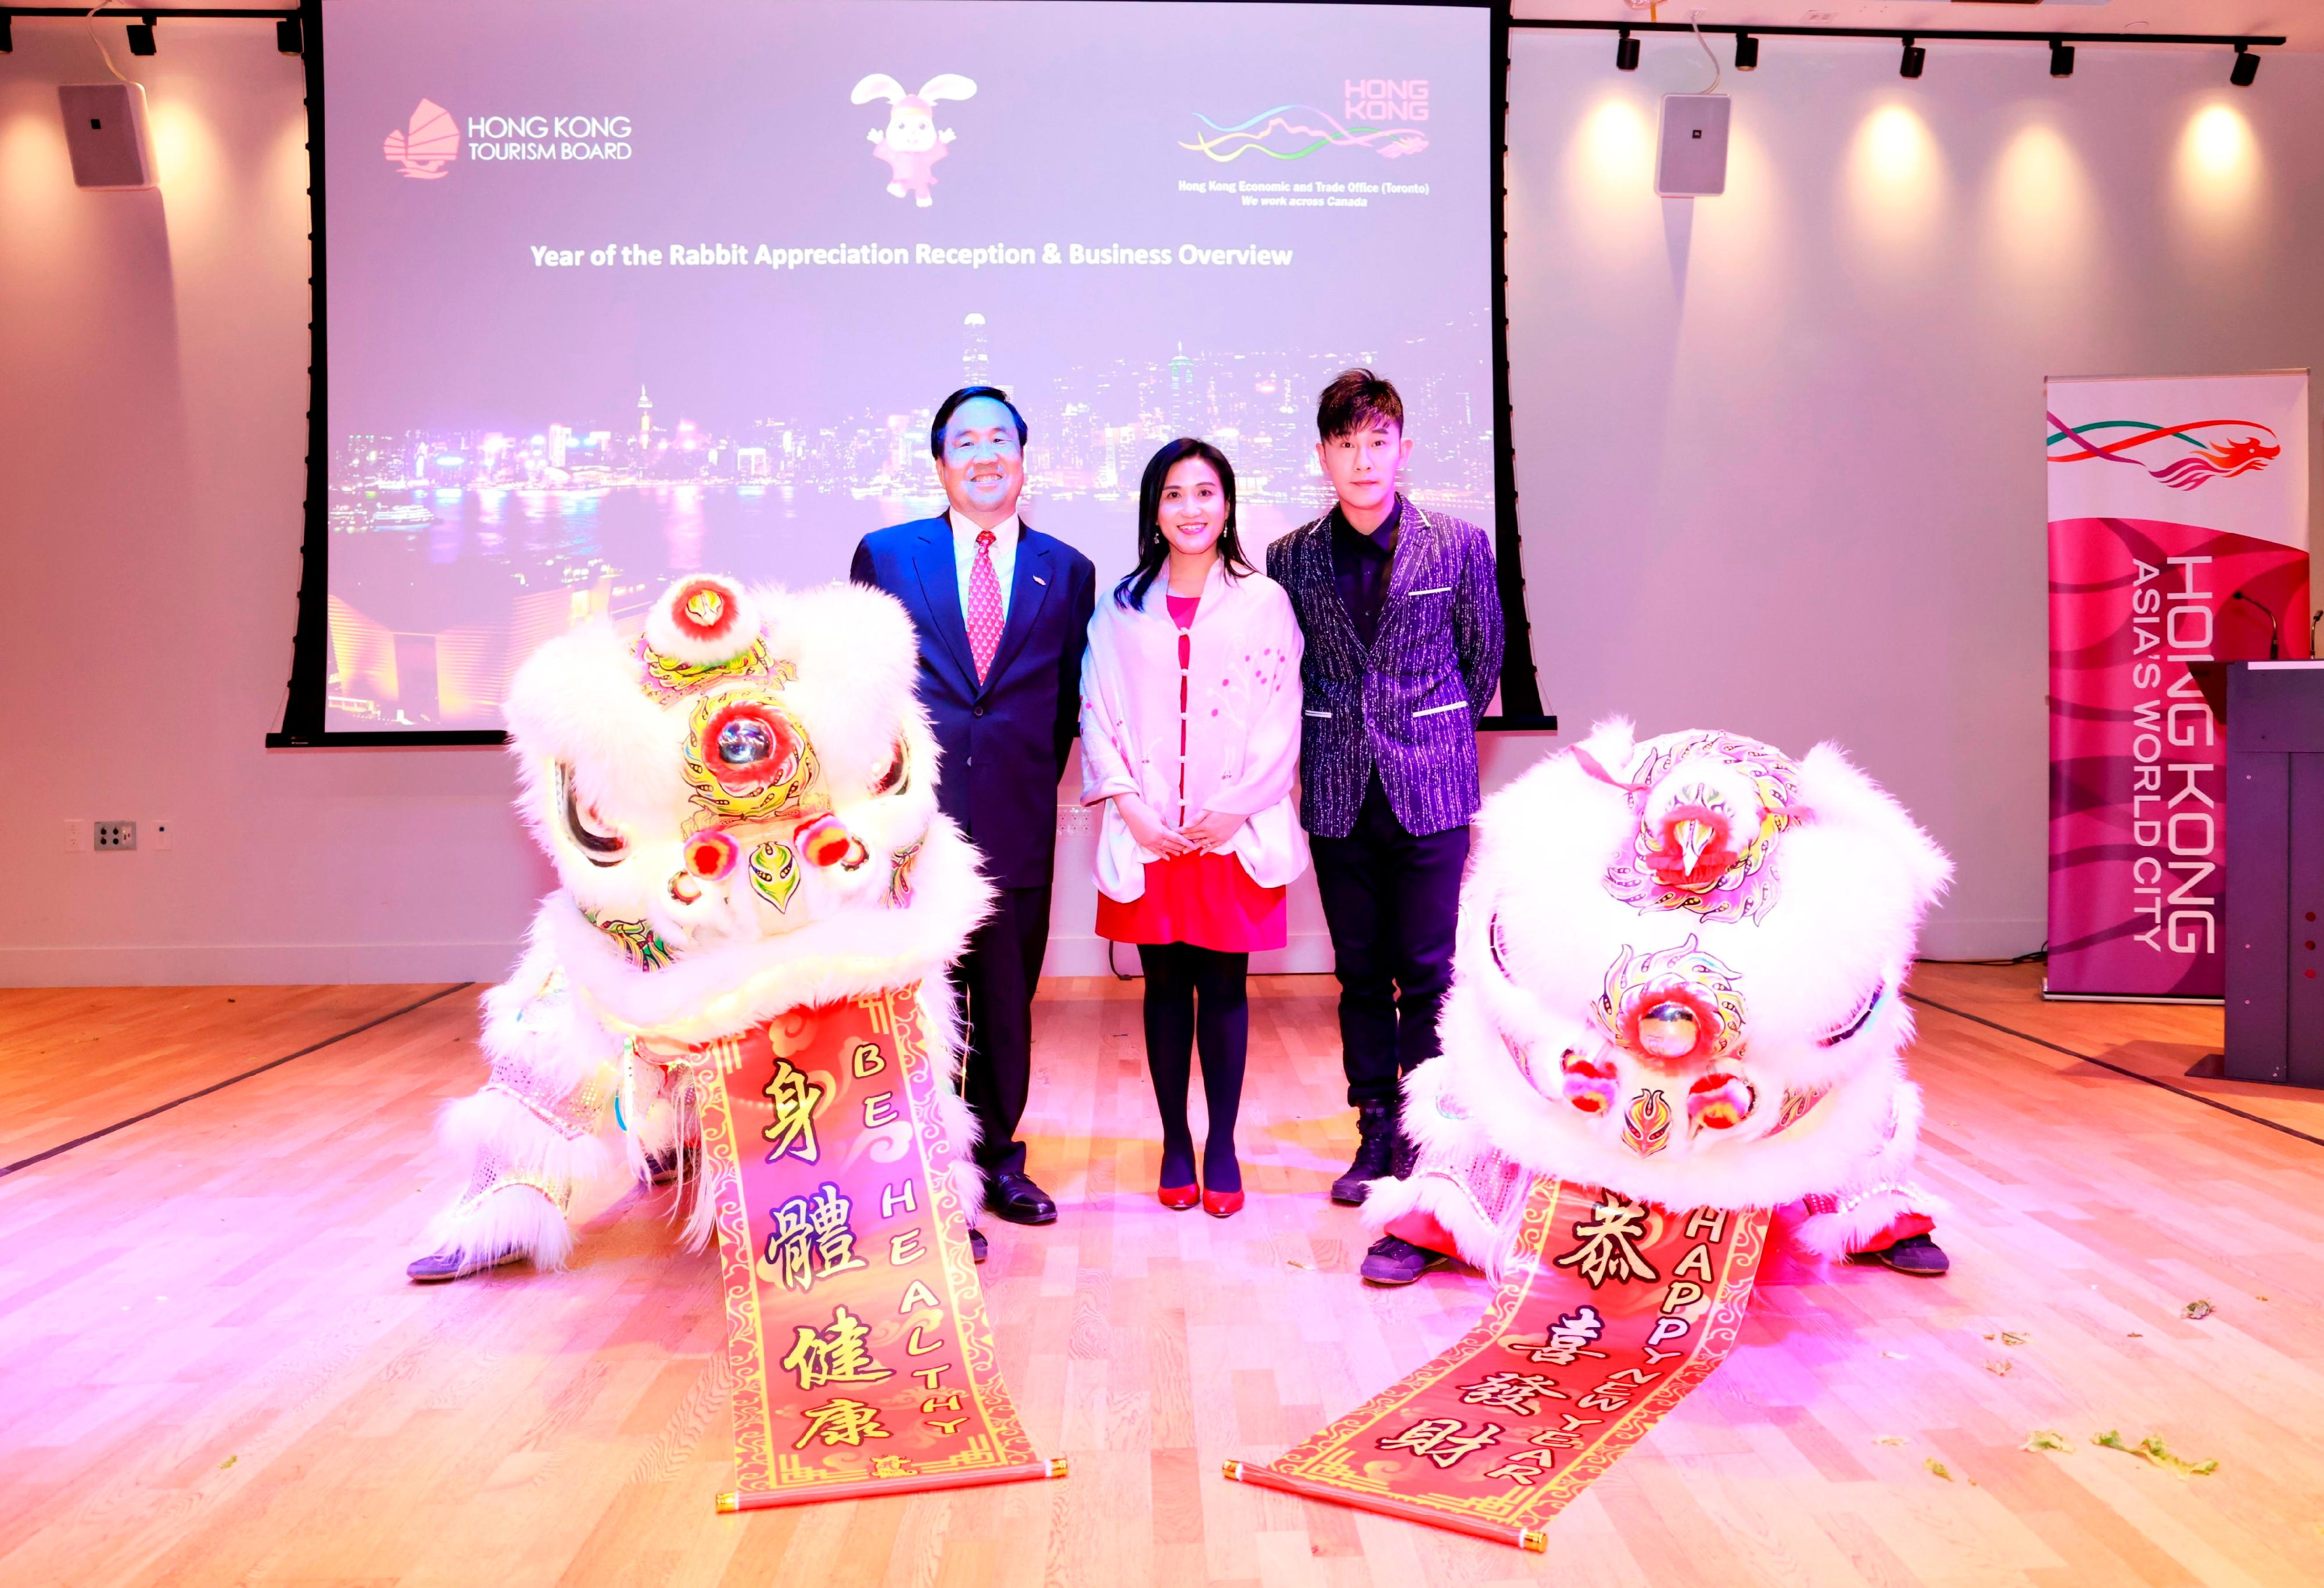 The Hong Kong Economic and Trade Office, Toronto (Toronto ETO) and the Hong Kong Tourism Board (Canada) (HKTB) held a Lunar New Year reception in Toronto today (January 19, Toronto time). Photo shows the Director of Toronto ETO, Ms Emily Mo (centre), with the HKTB Director for Canada, Central and South Americas, Mr Michael Lim (left), Hong Kong magician Louis Yan (right) and the lion dance troupe at the reception.